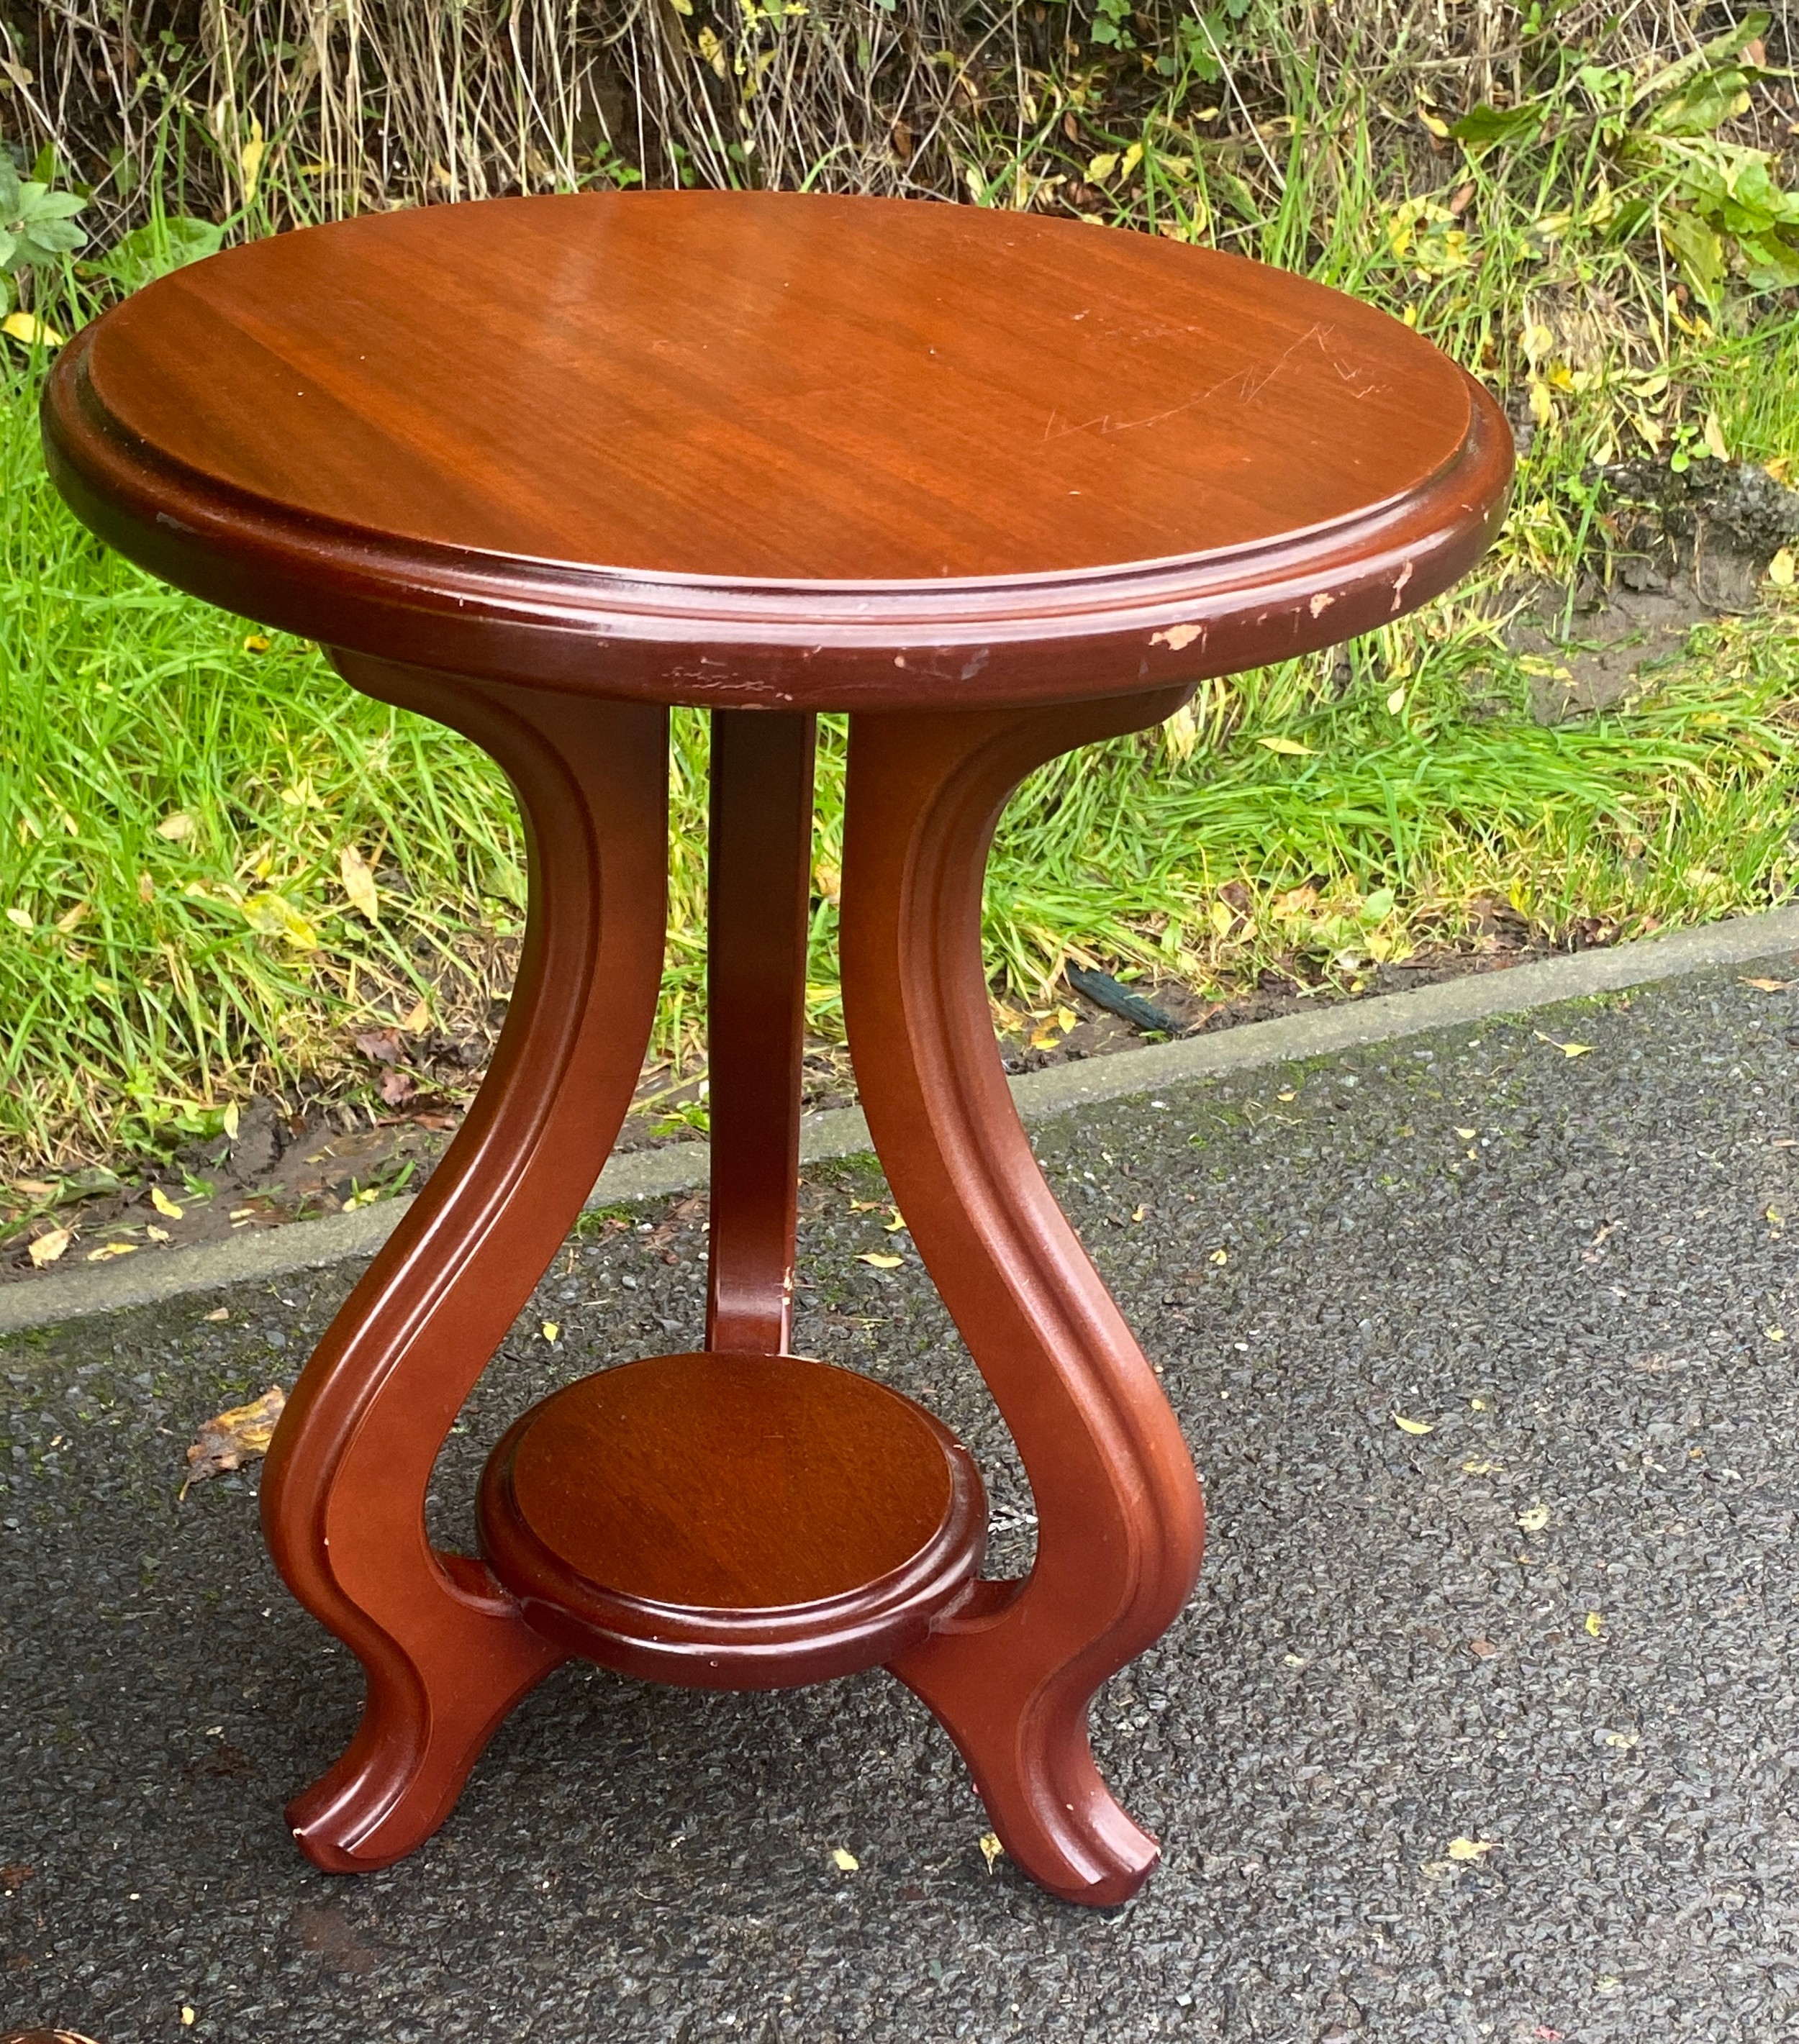 2 Vintage occasional tables, largest measures approximately 26 inches tall 26.5 inches wide - Image 3 of 4